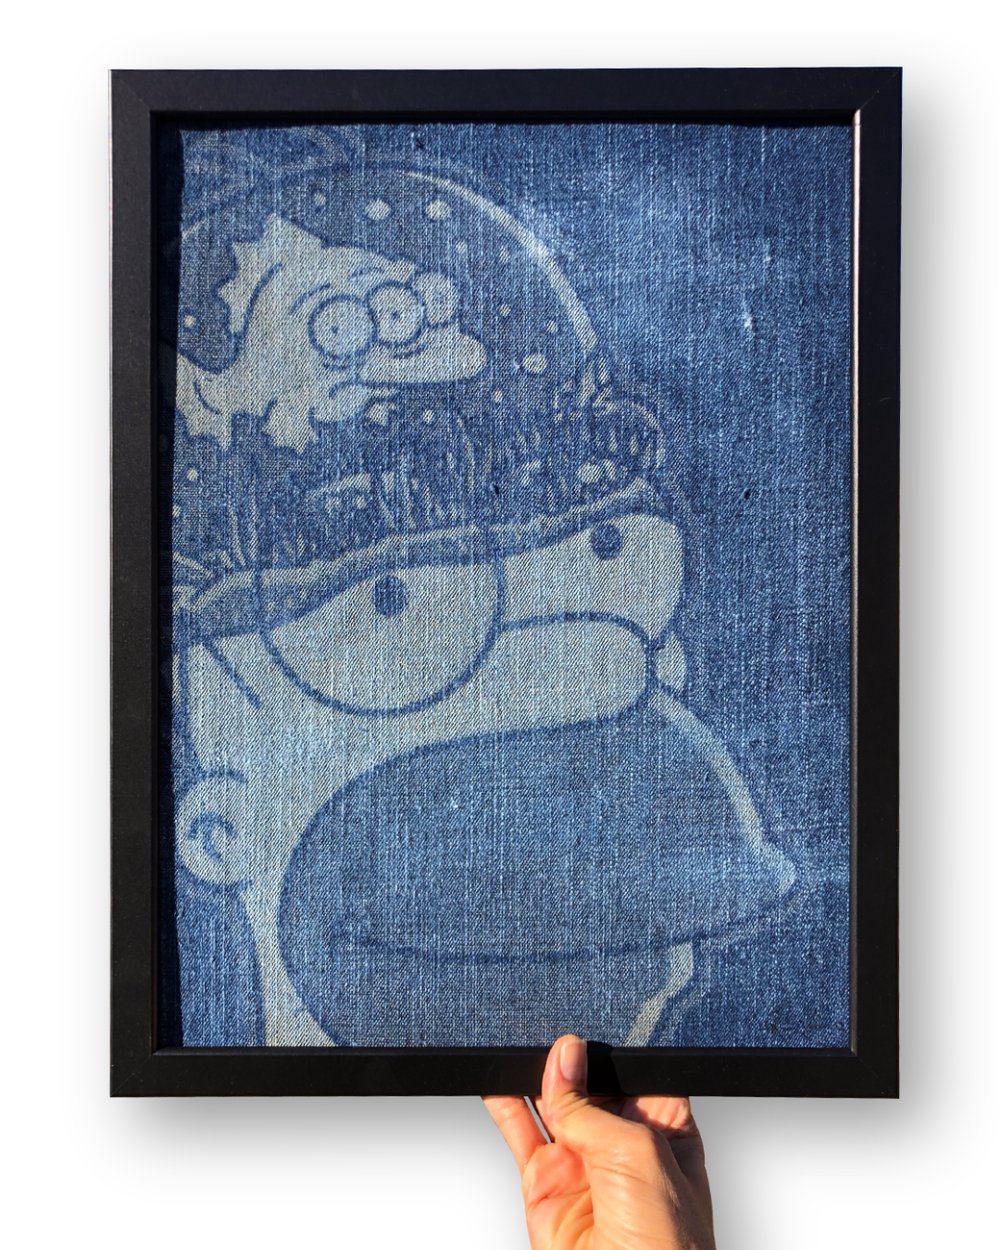 Image of Blinky in the Brain -16" Laser Engraved Hand Distressed on Denim - Art Print